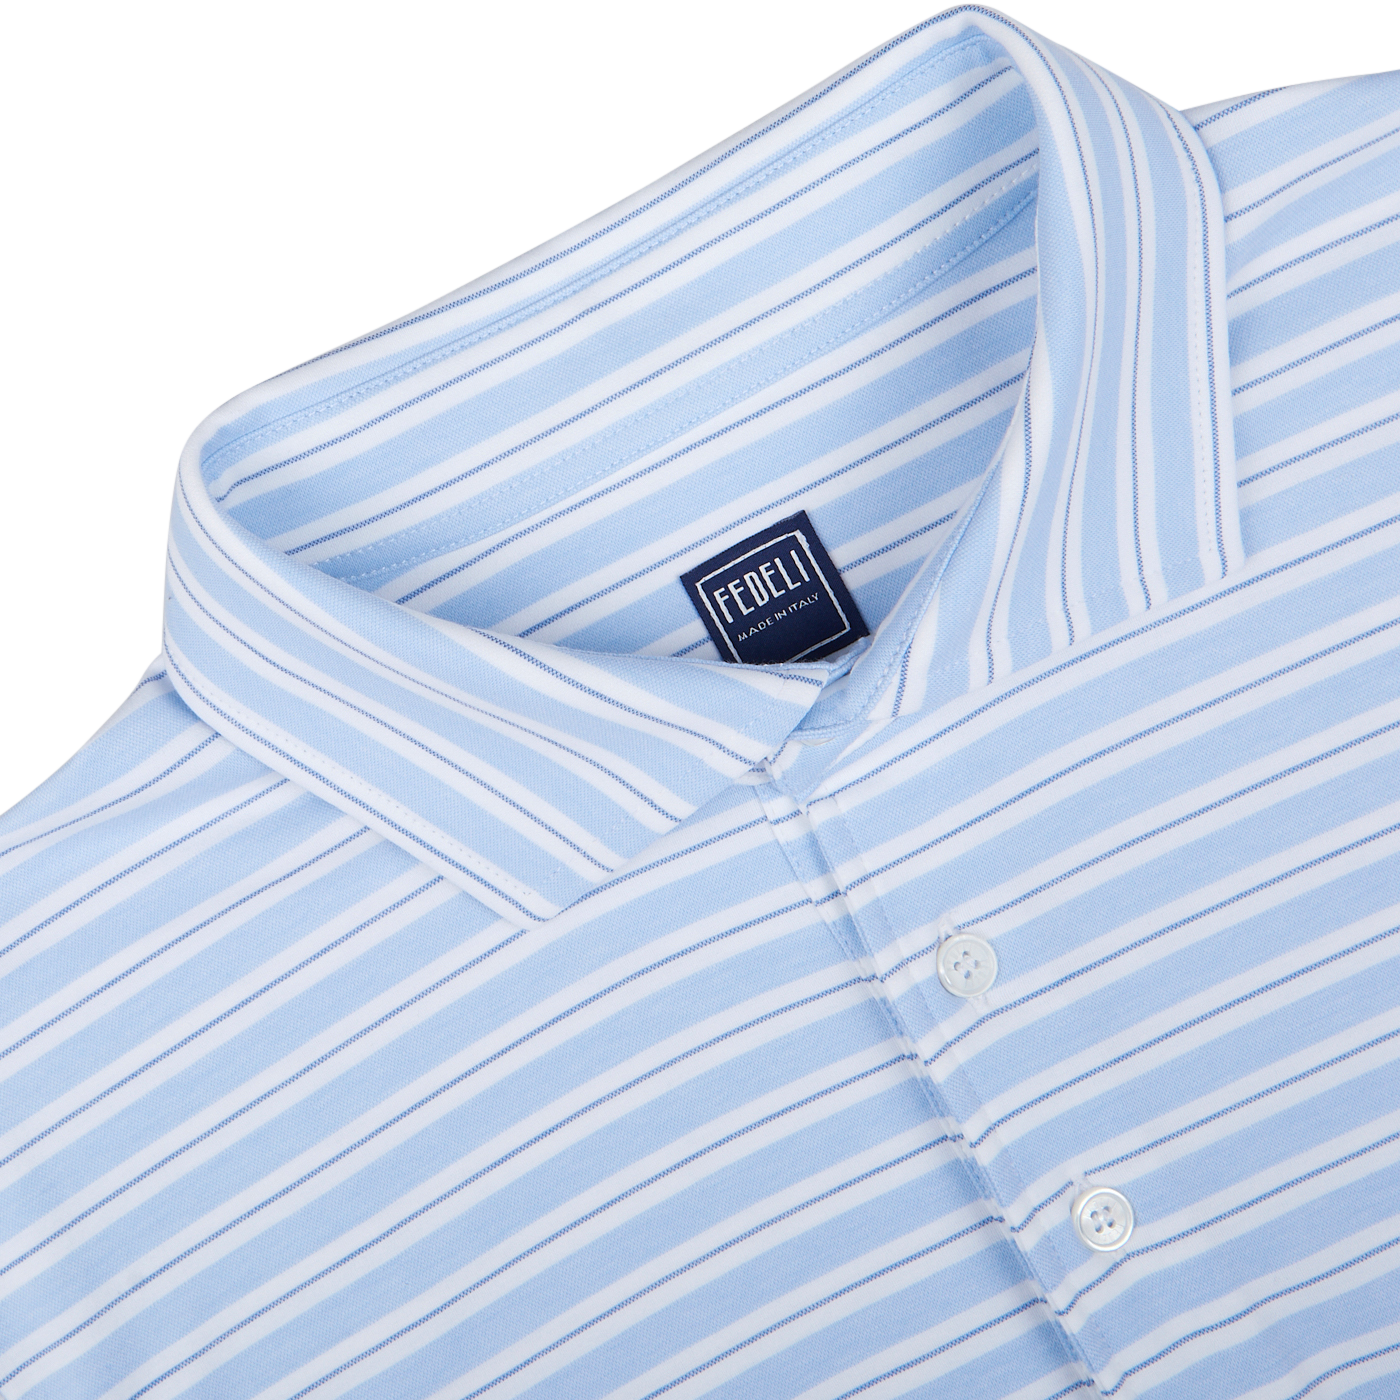 Light blue and white striped summer polo shirt with a focus on its collar and label - Blue Multi Striped Cotton Jersey Polo Shirt by Fedeli.